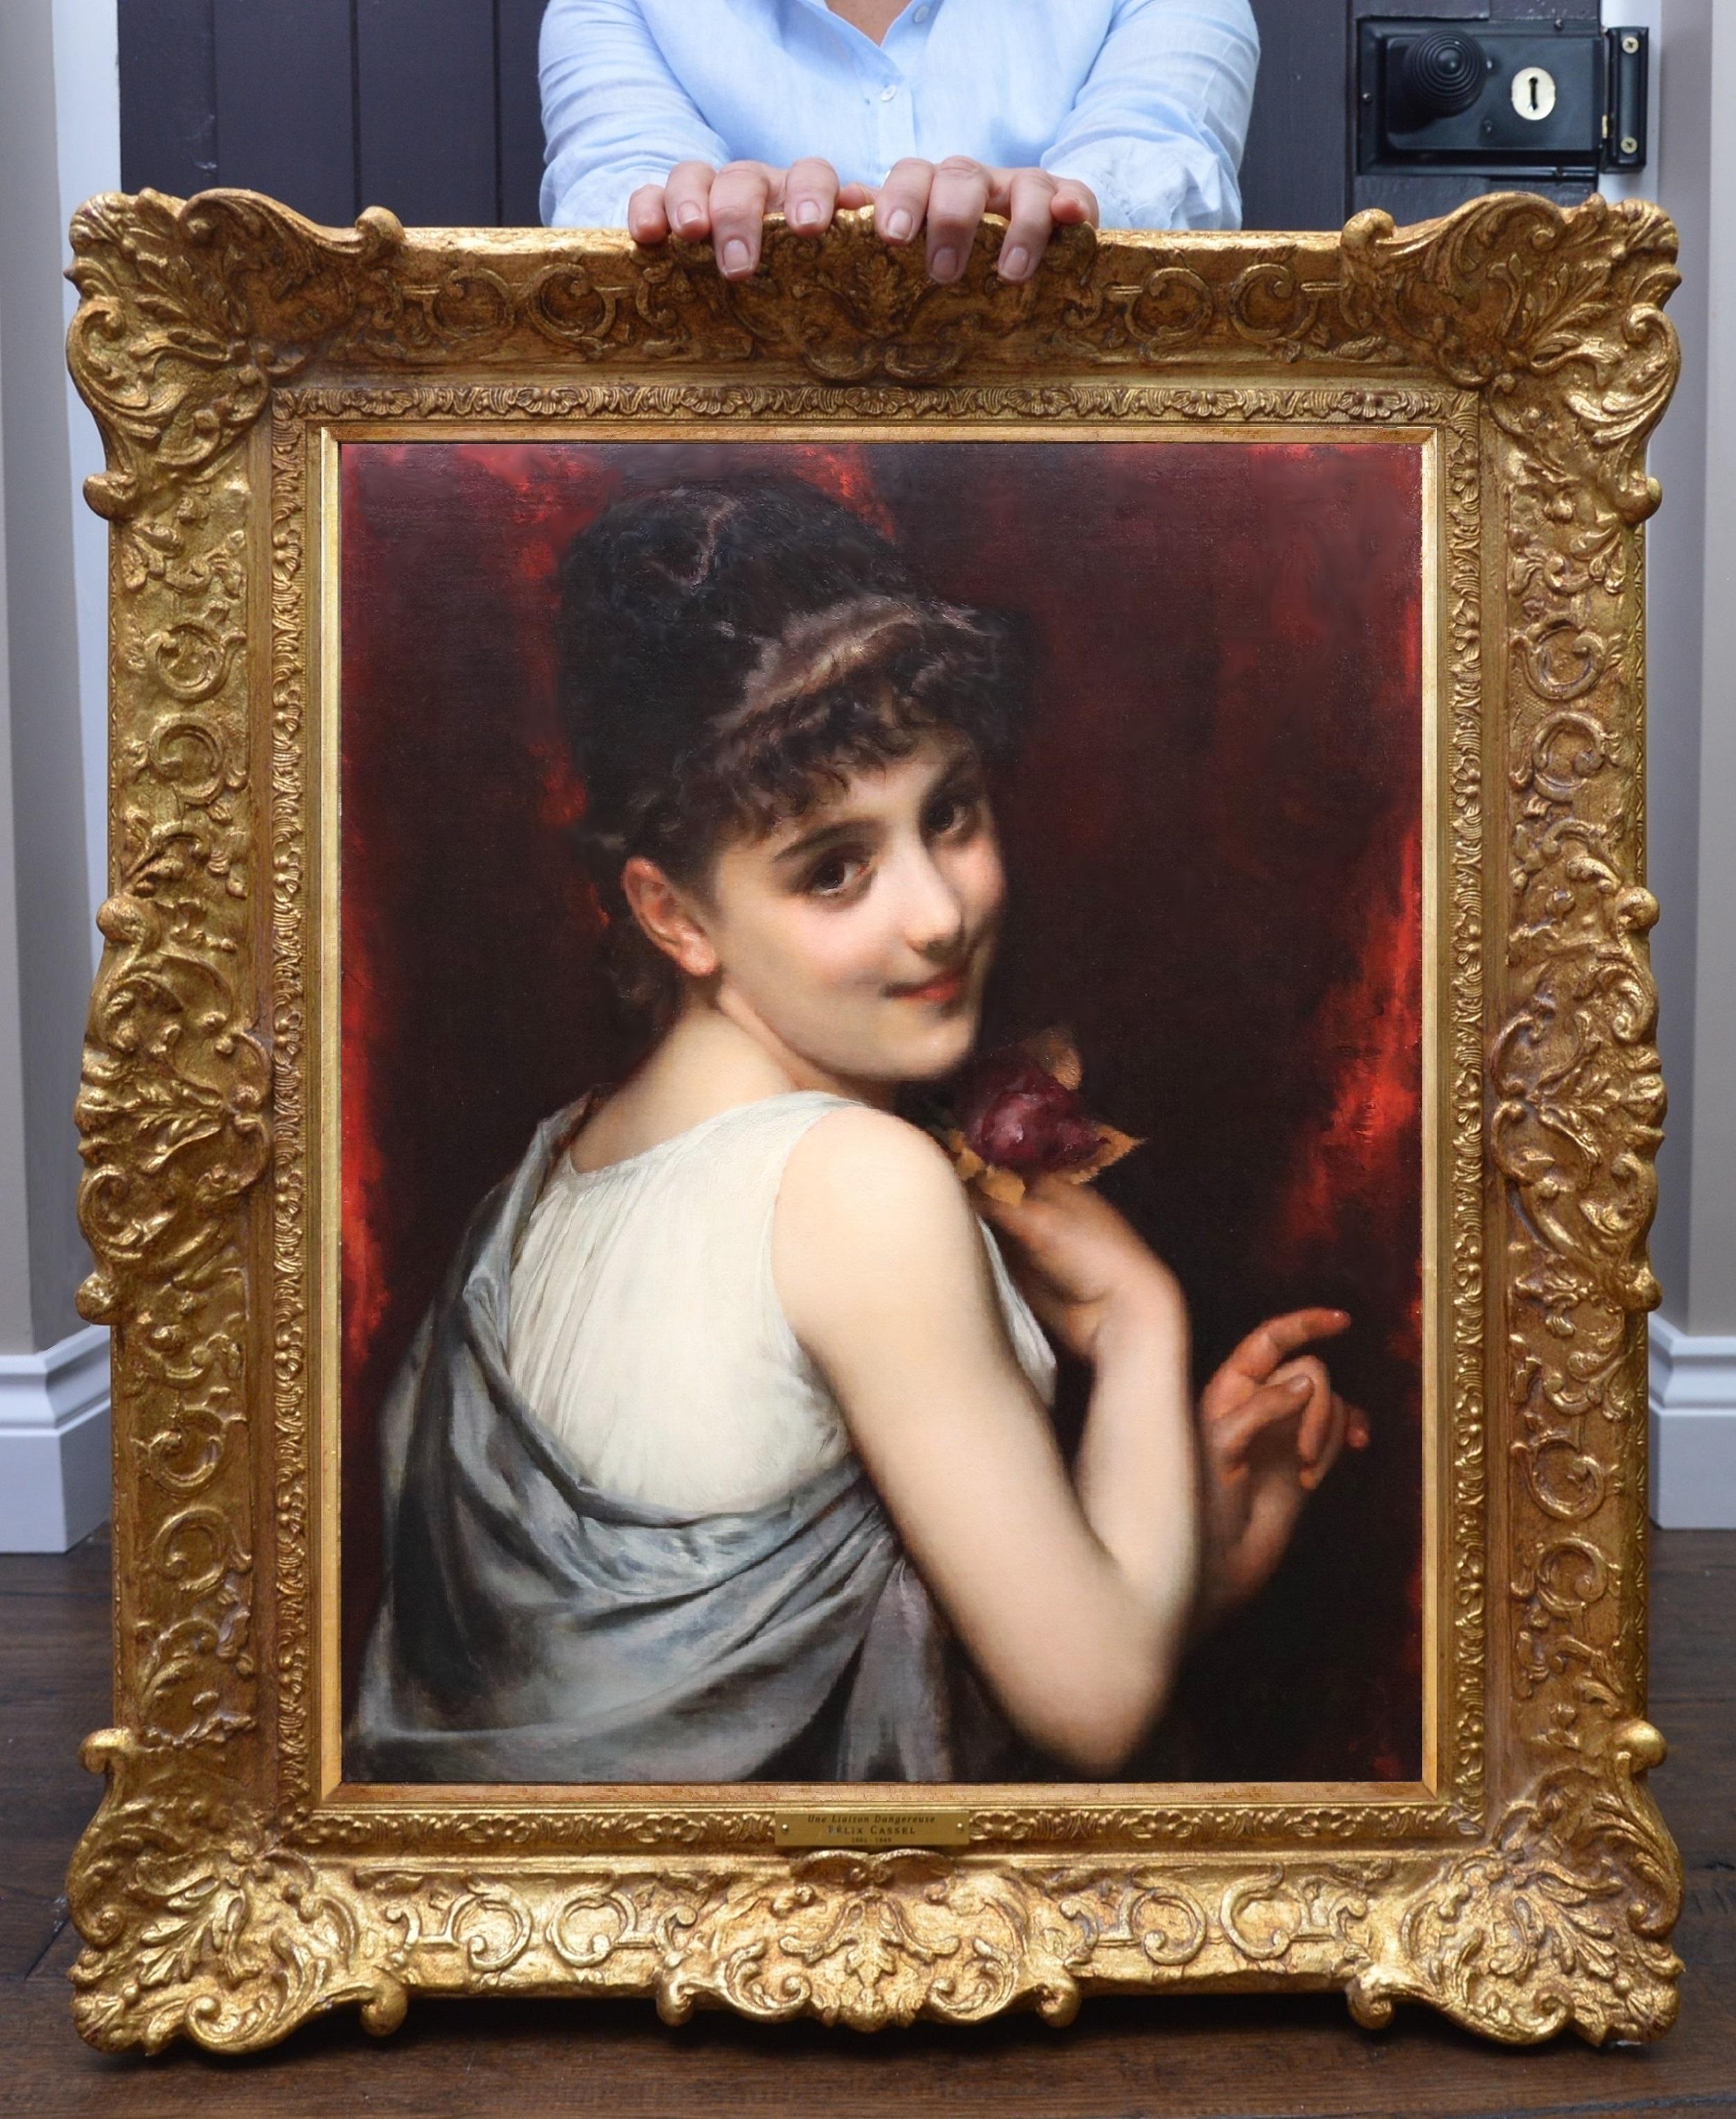 Etienne Adolphe Piot Portrait Painting - Young Belle Epoque Beauty - 19th Century Oil Painting Portrait of a French Girl